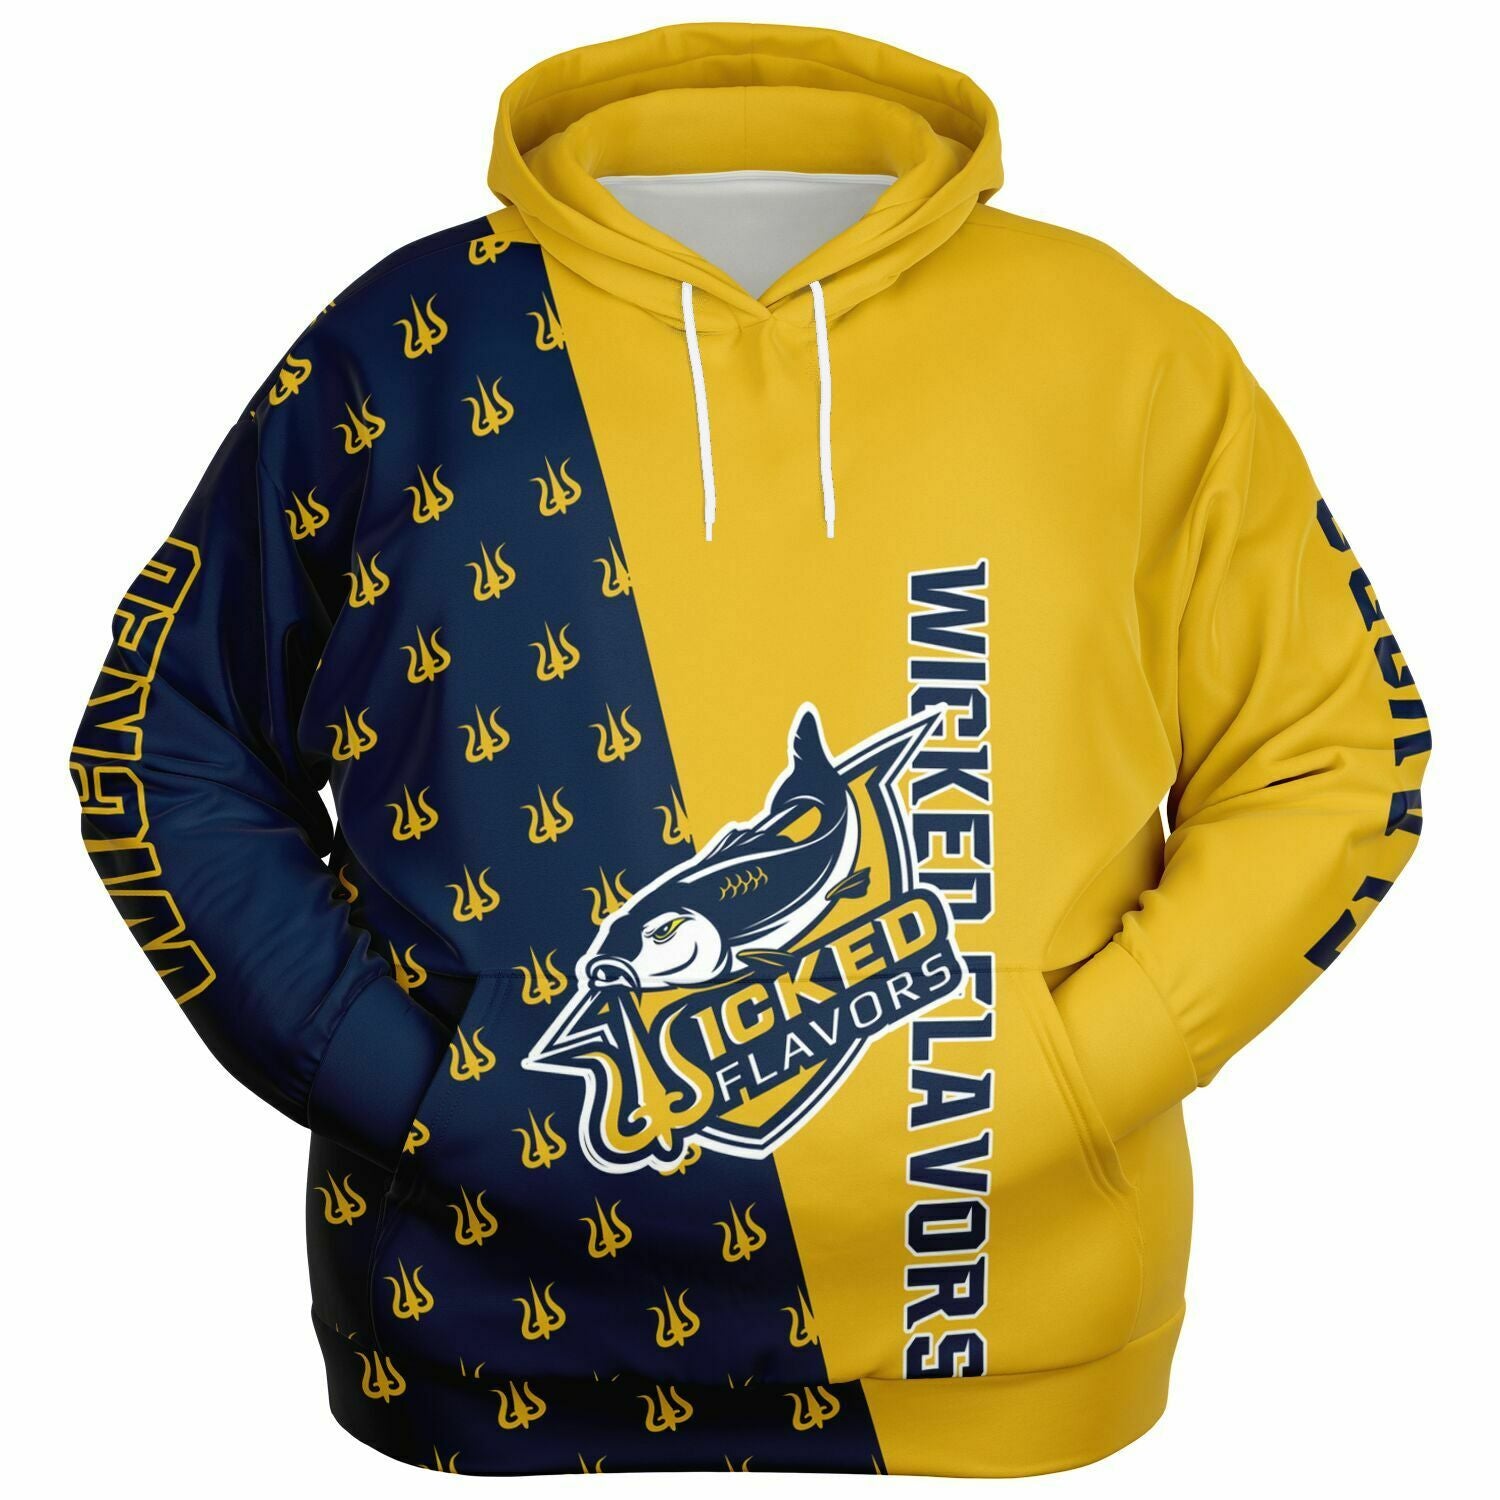 2XL BLUE AND GOLD